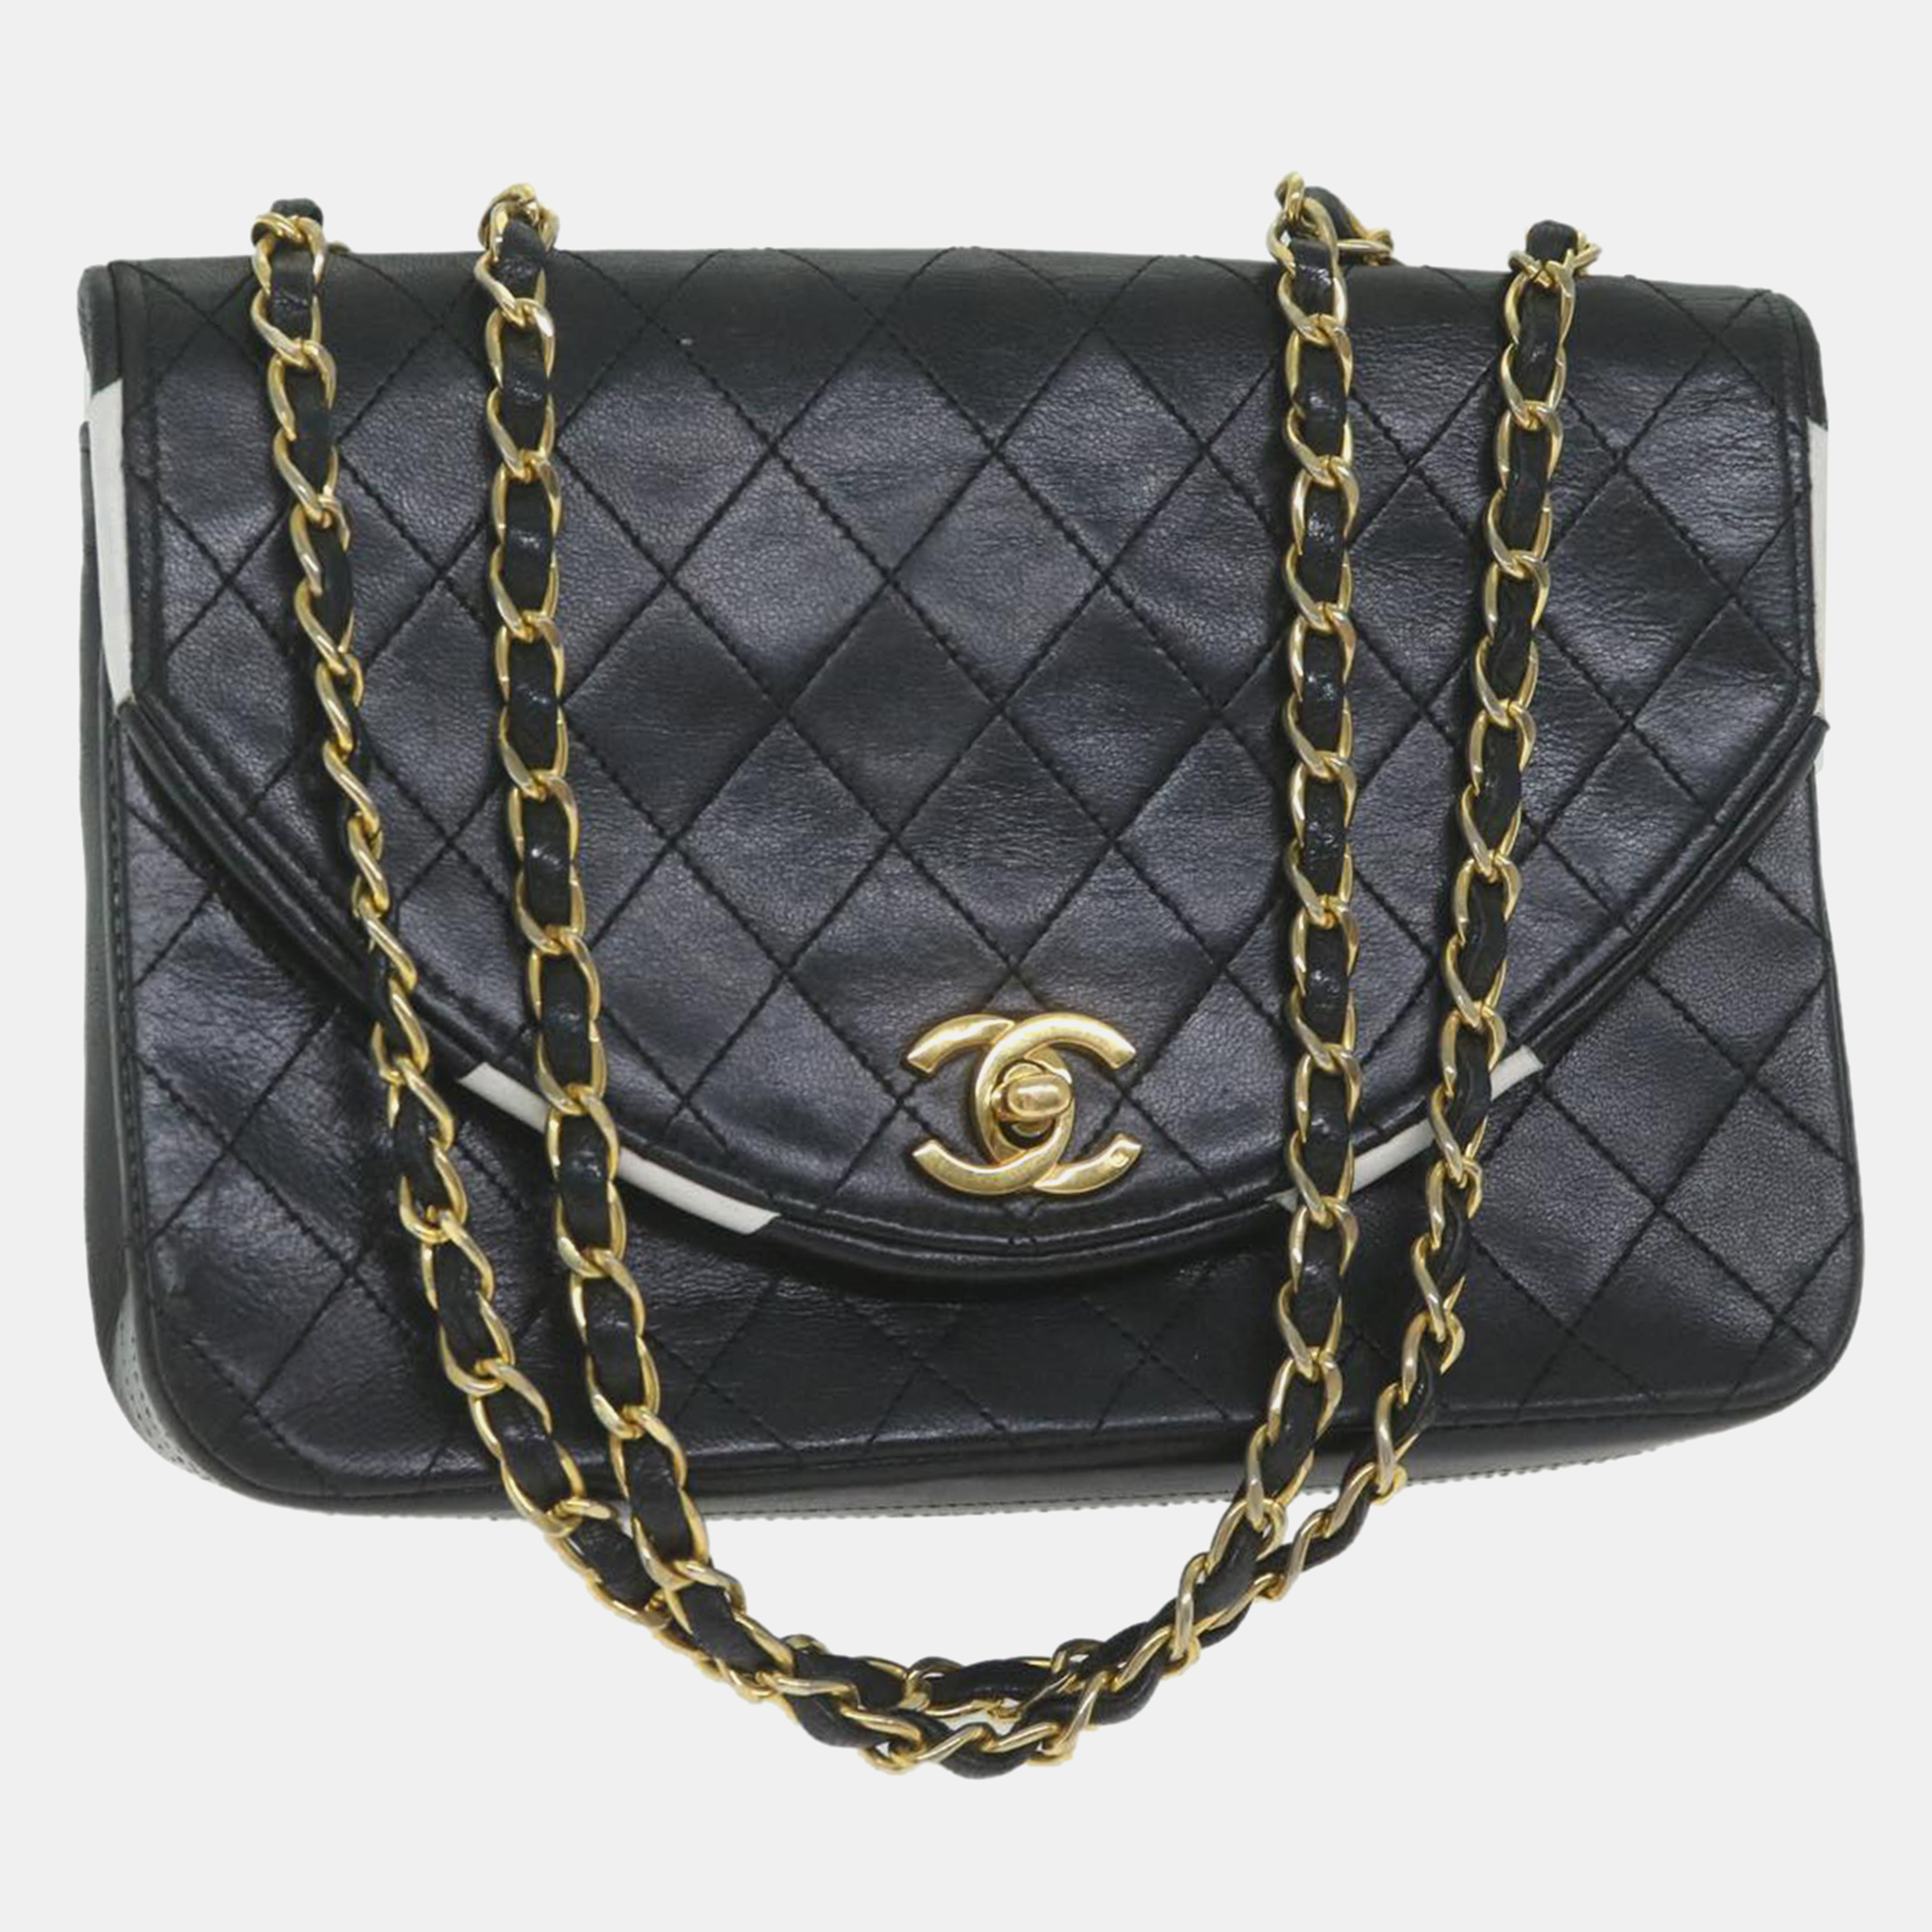 Chanel black leather quilted half moon flap bag